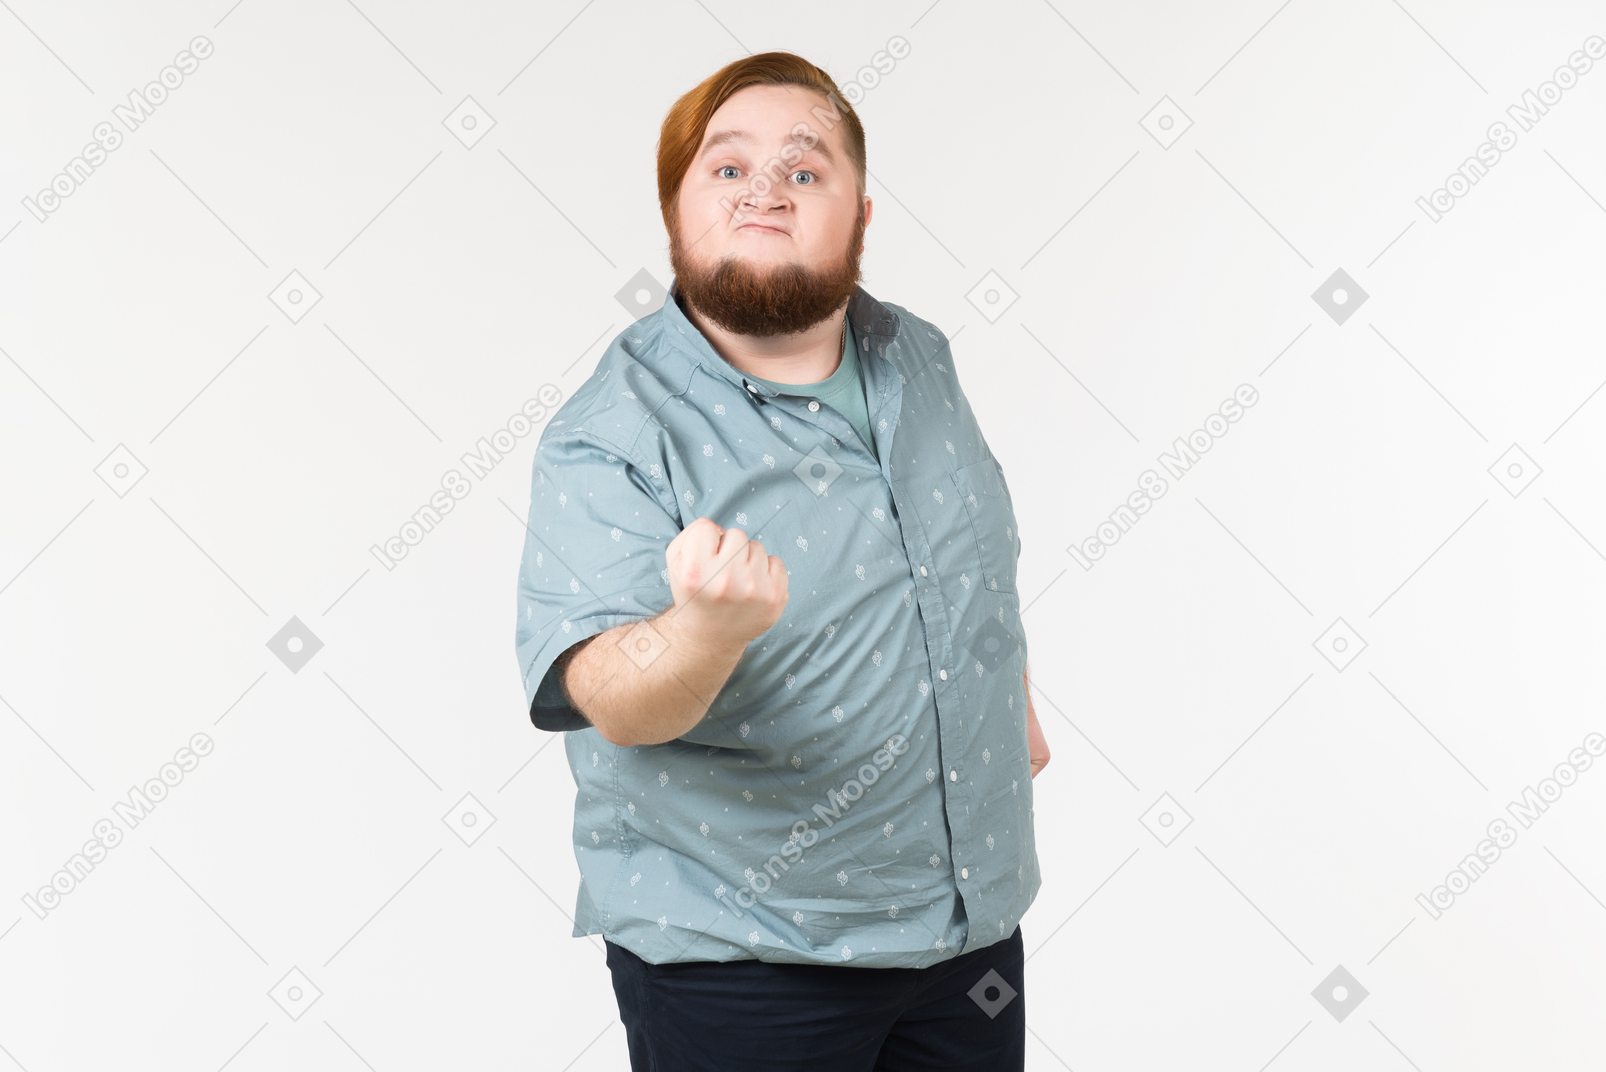 A fat man shaking his fist at someone